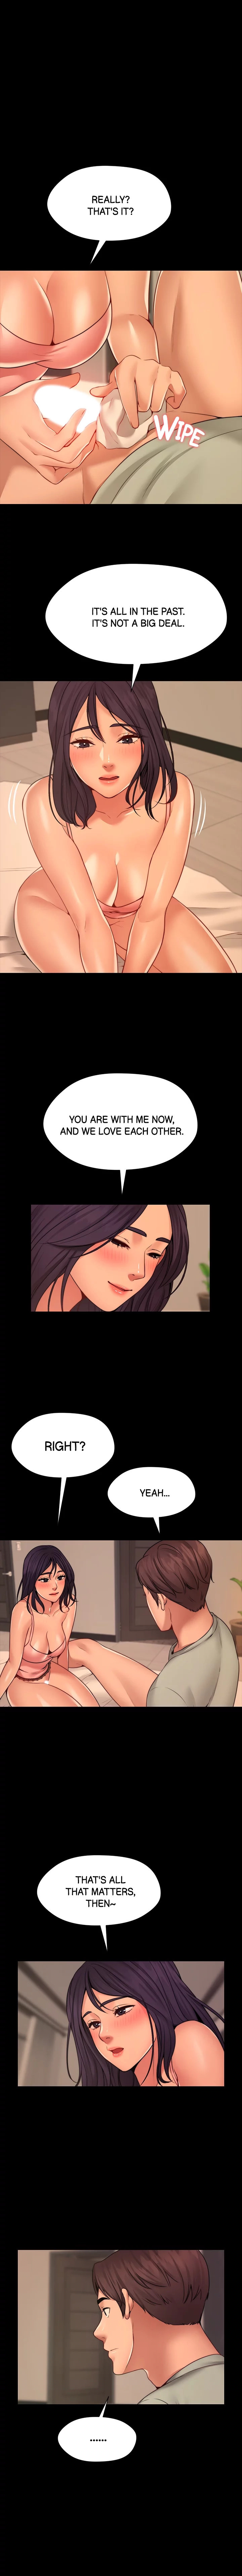 Dreaming : My Friend’s Girl - Chapter 9 Page 6